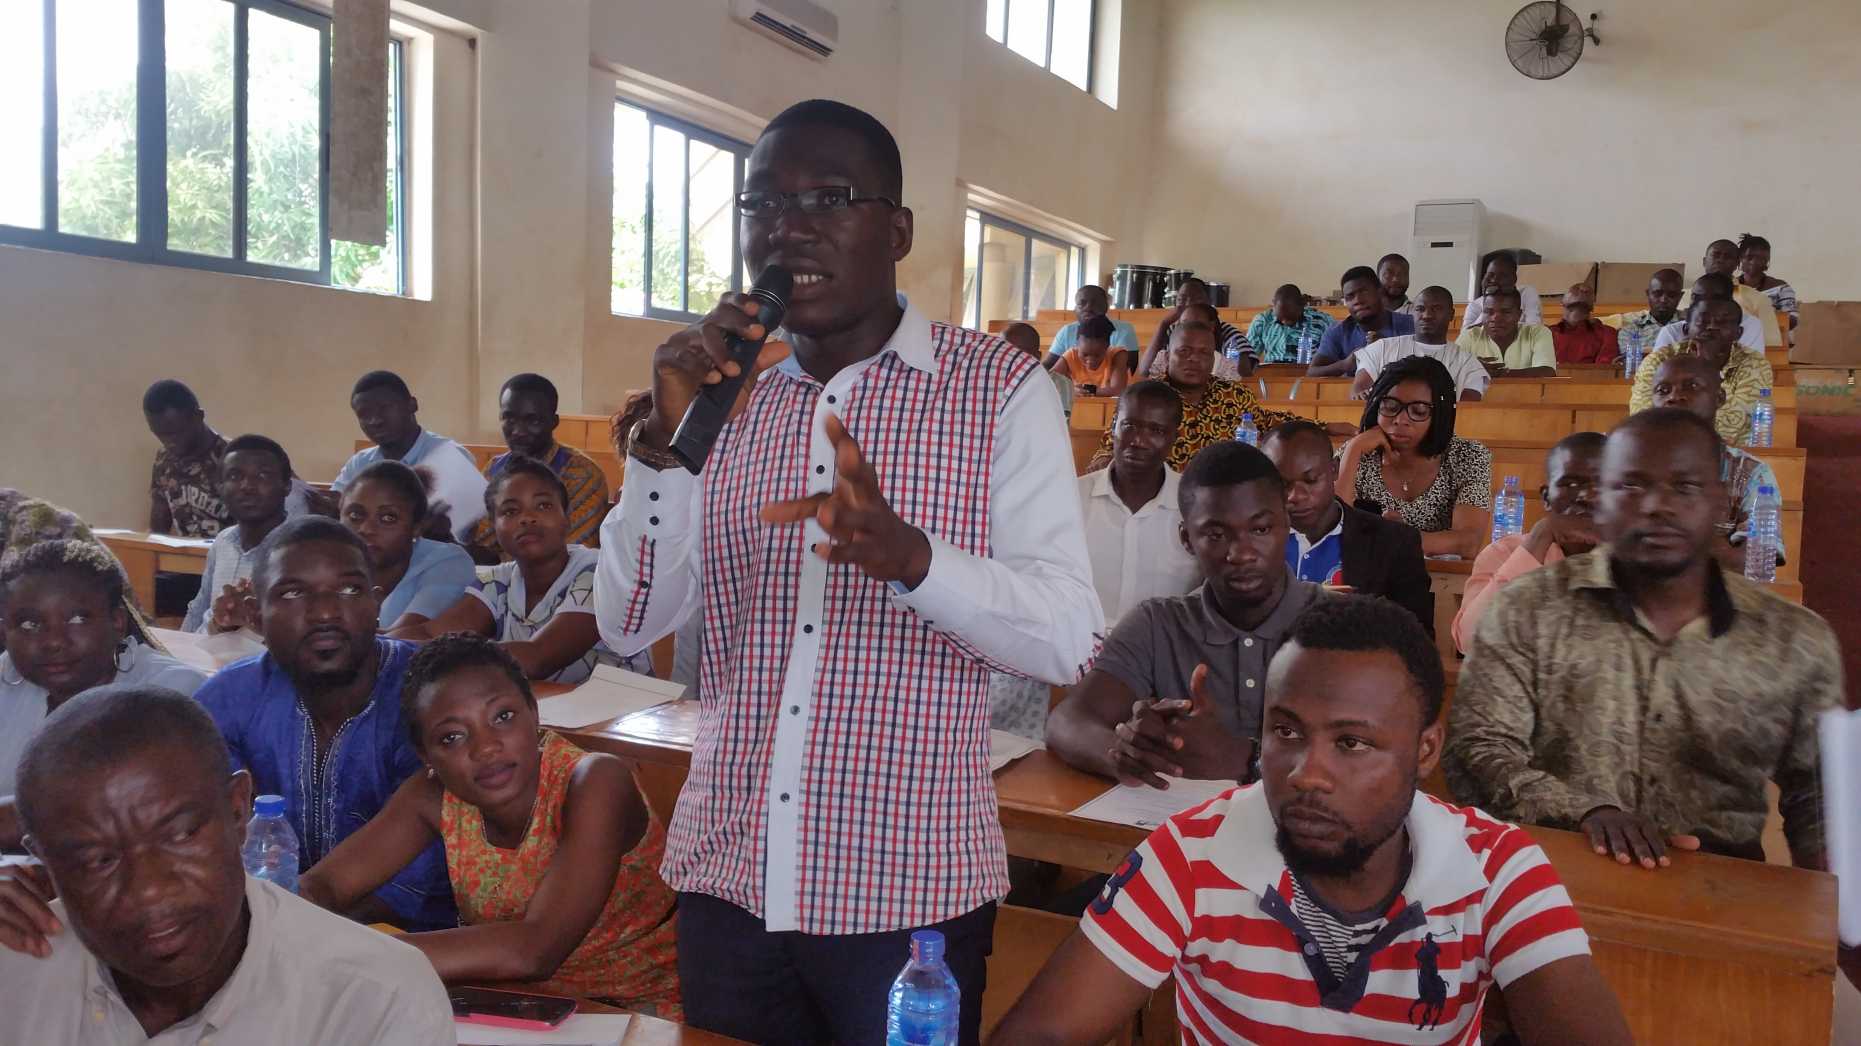 Enlarged view: Student audience during a Scientific Engagement at the University for Development Studies (UDS), Ghana.